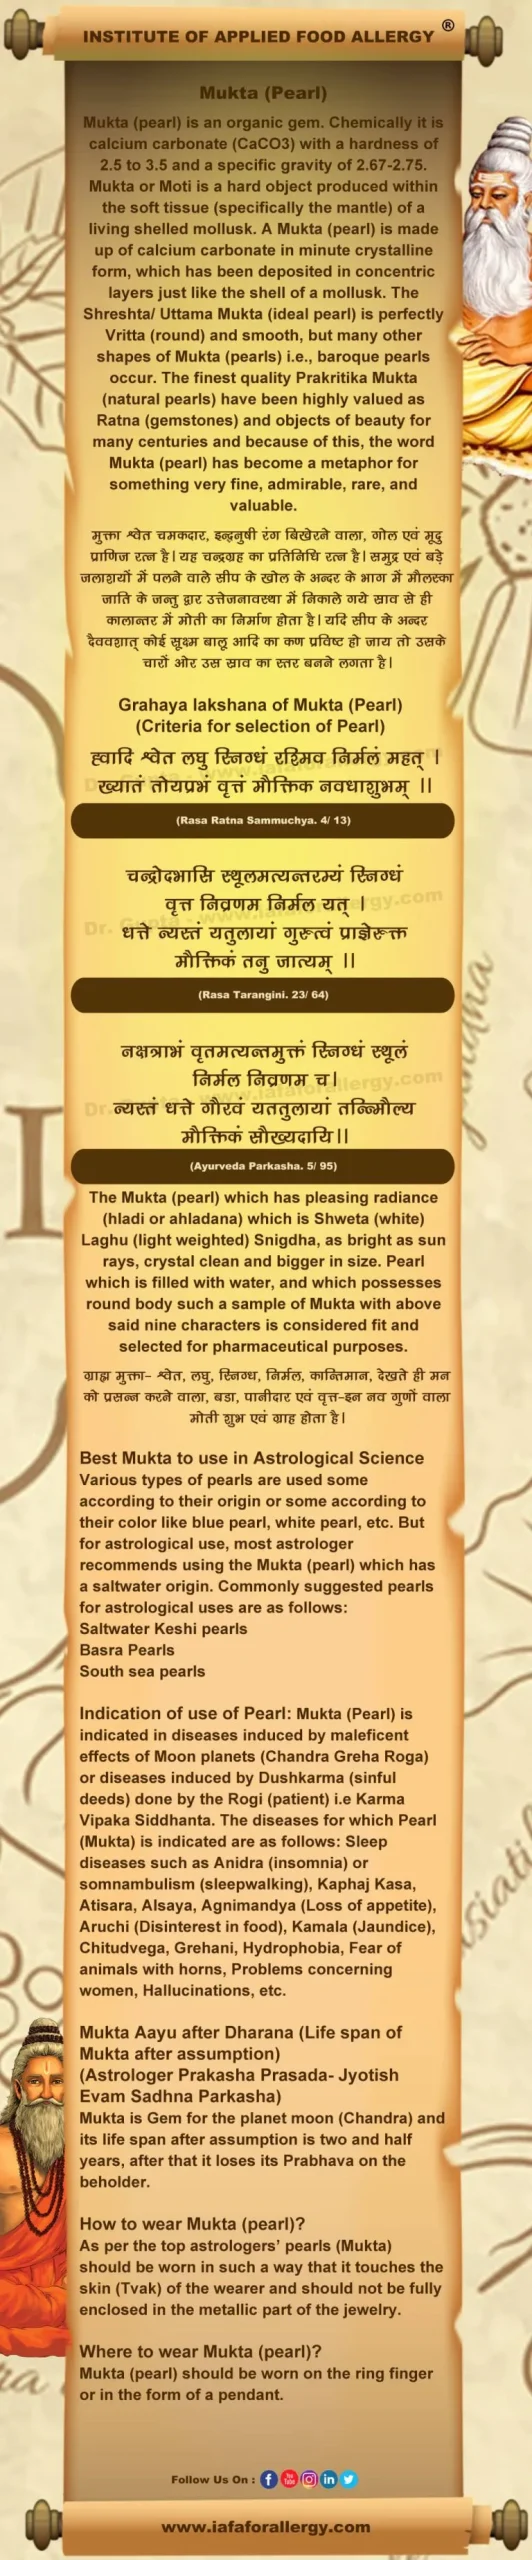 Book Reference of Mukta (Pearl)